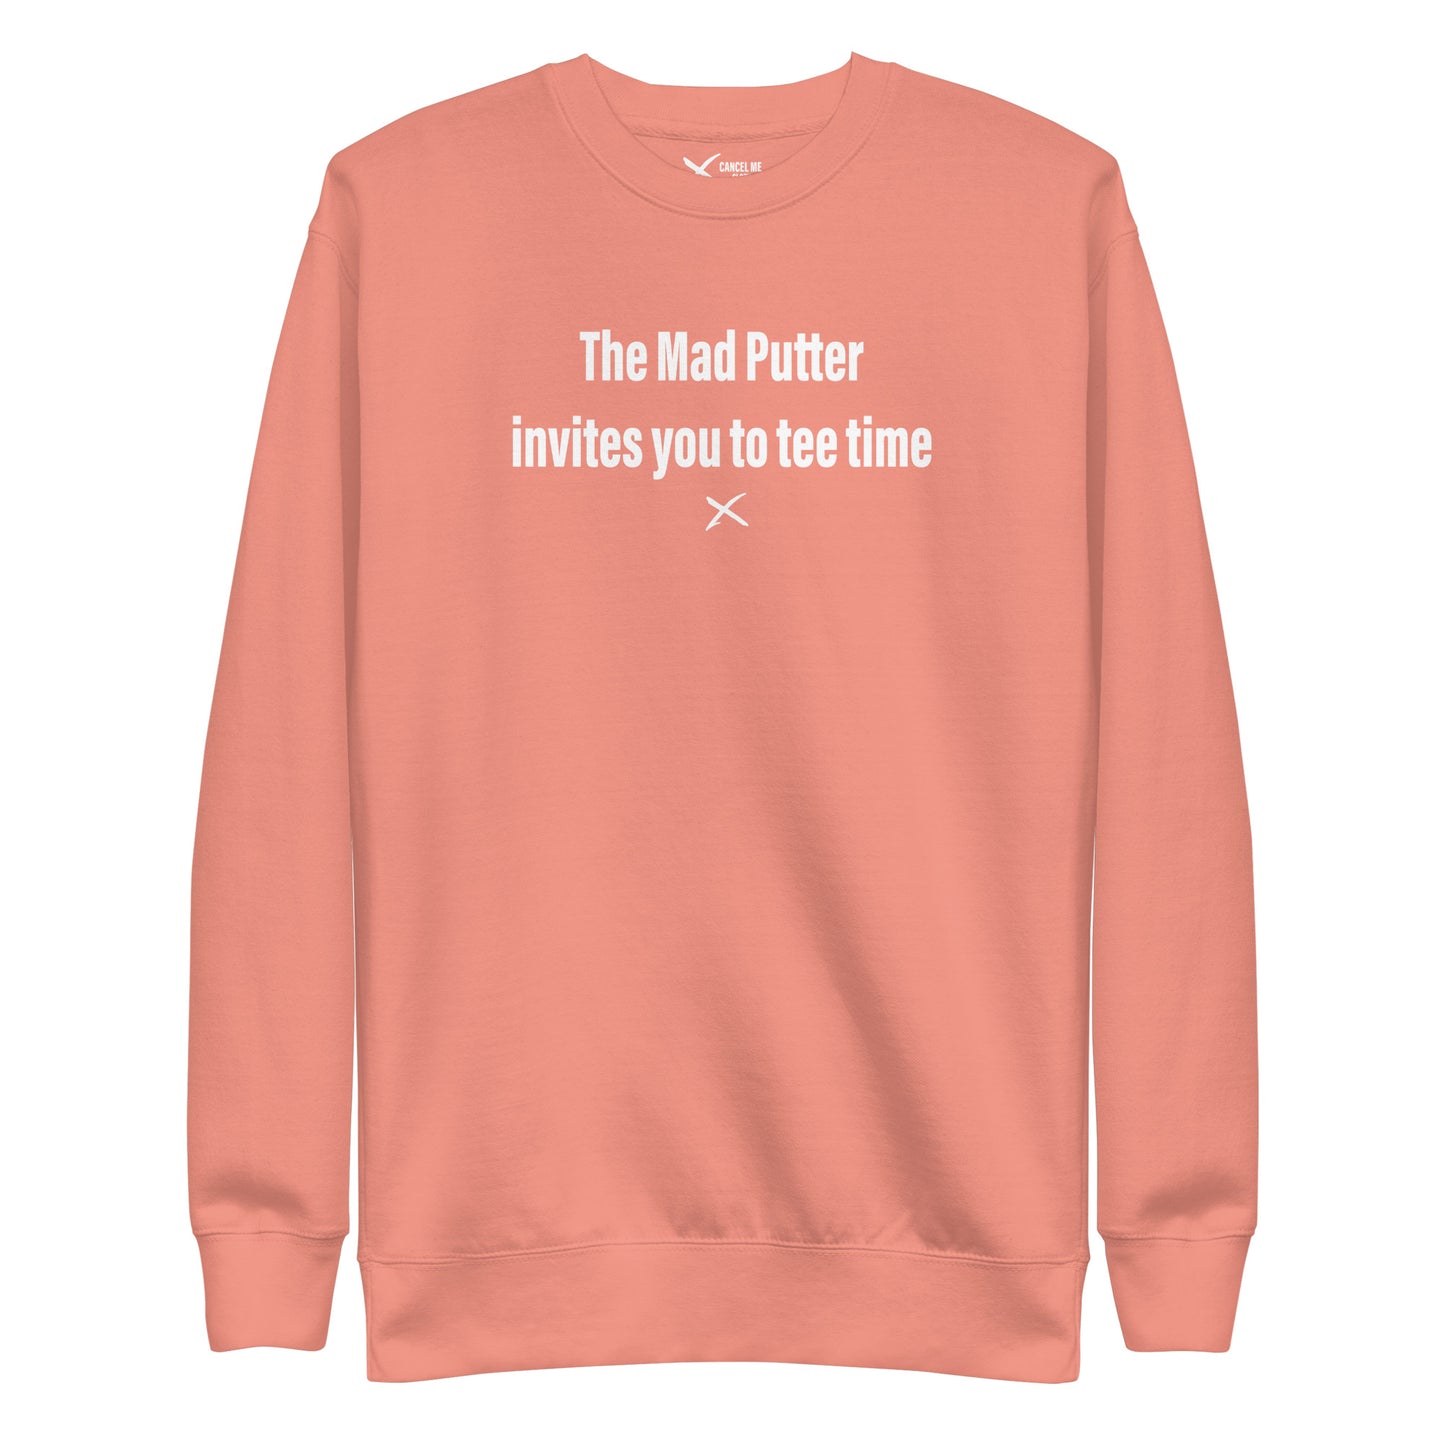 The Mad Putter invites you to tee time - Sweatshirt